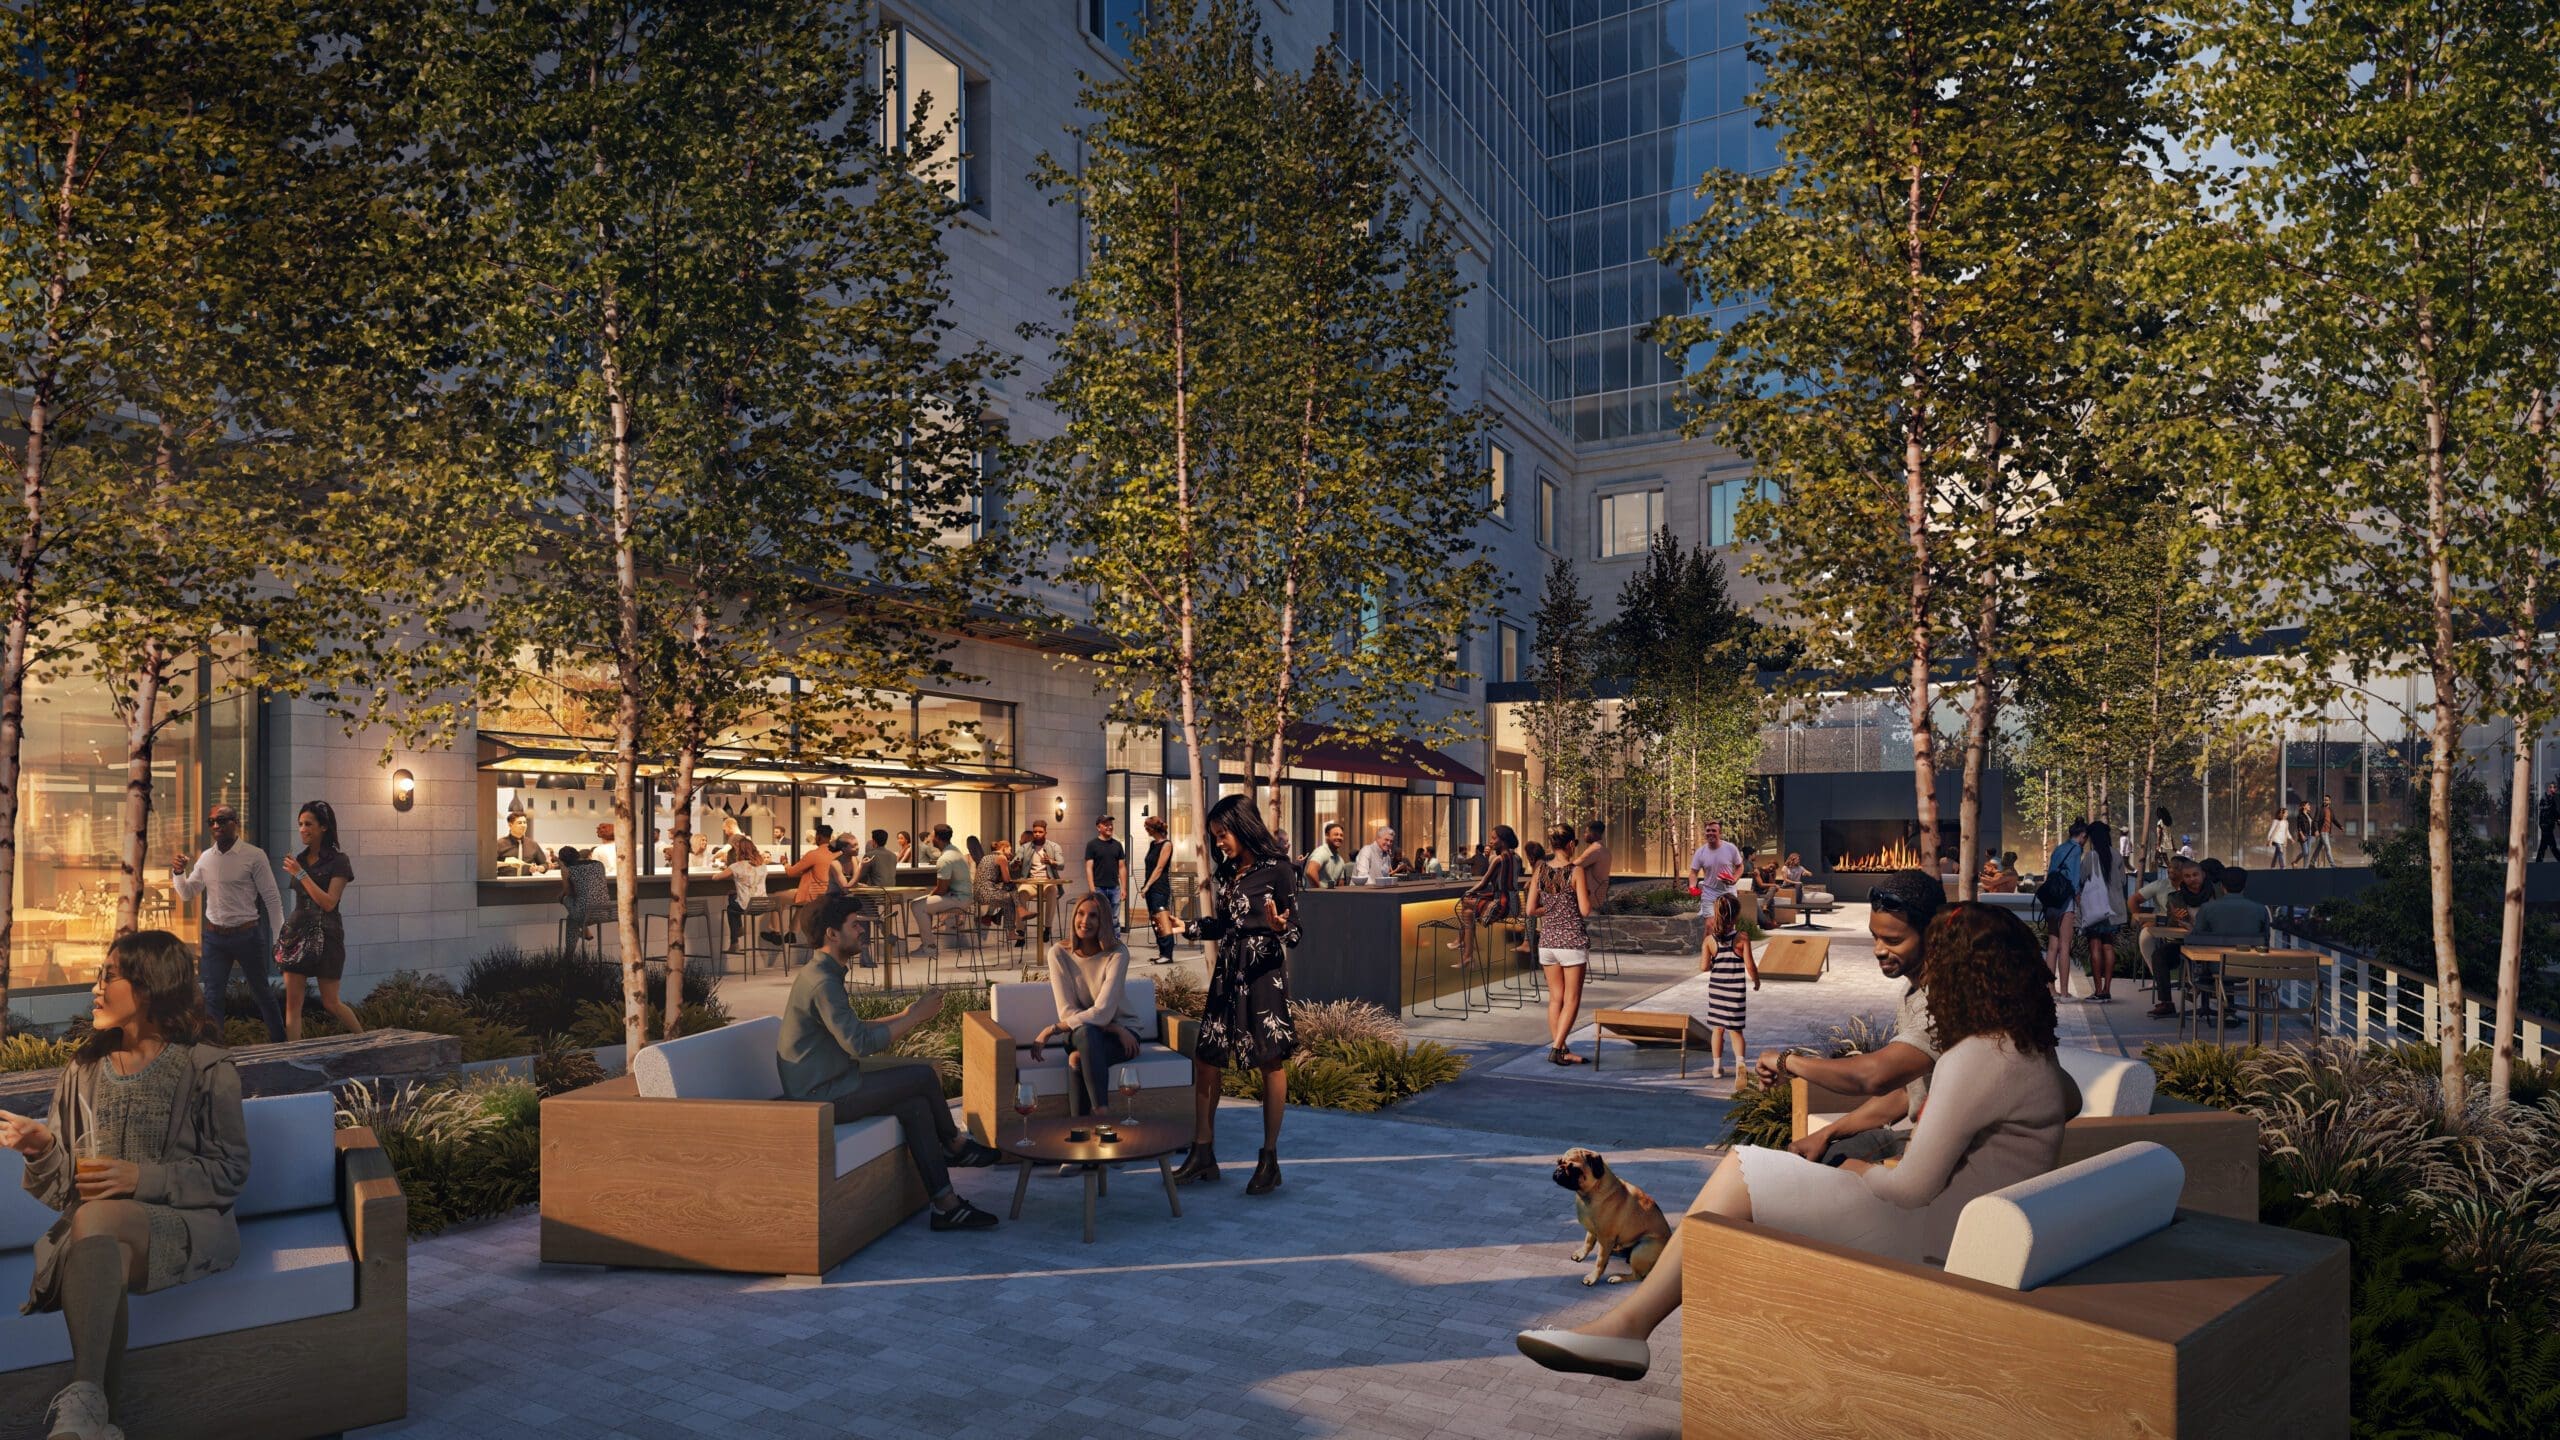 Featured image for “Chancery Market to open courtyard; new movie theater moves in”